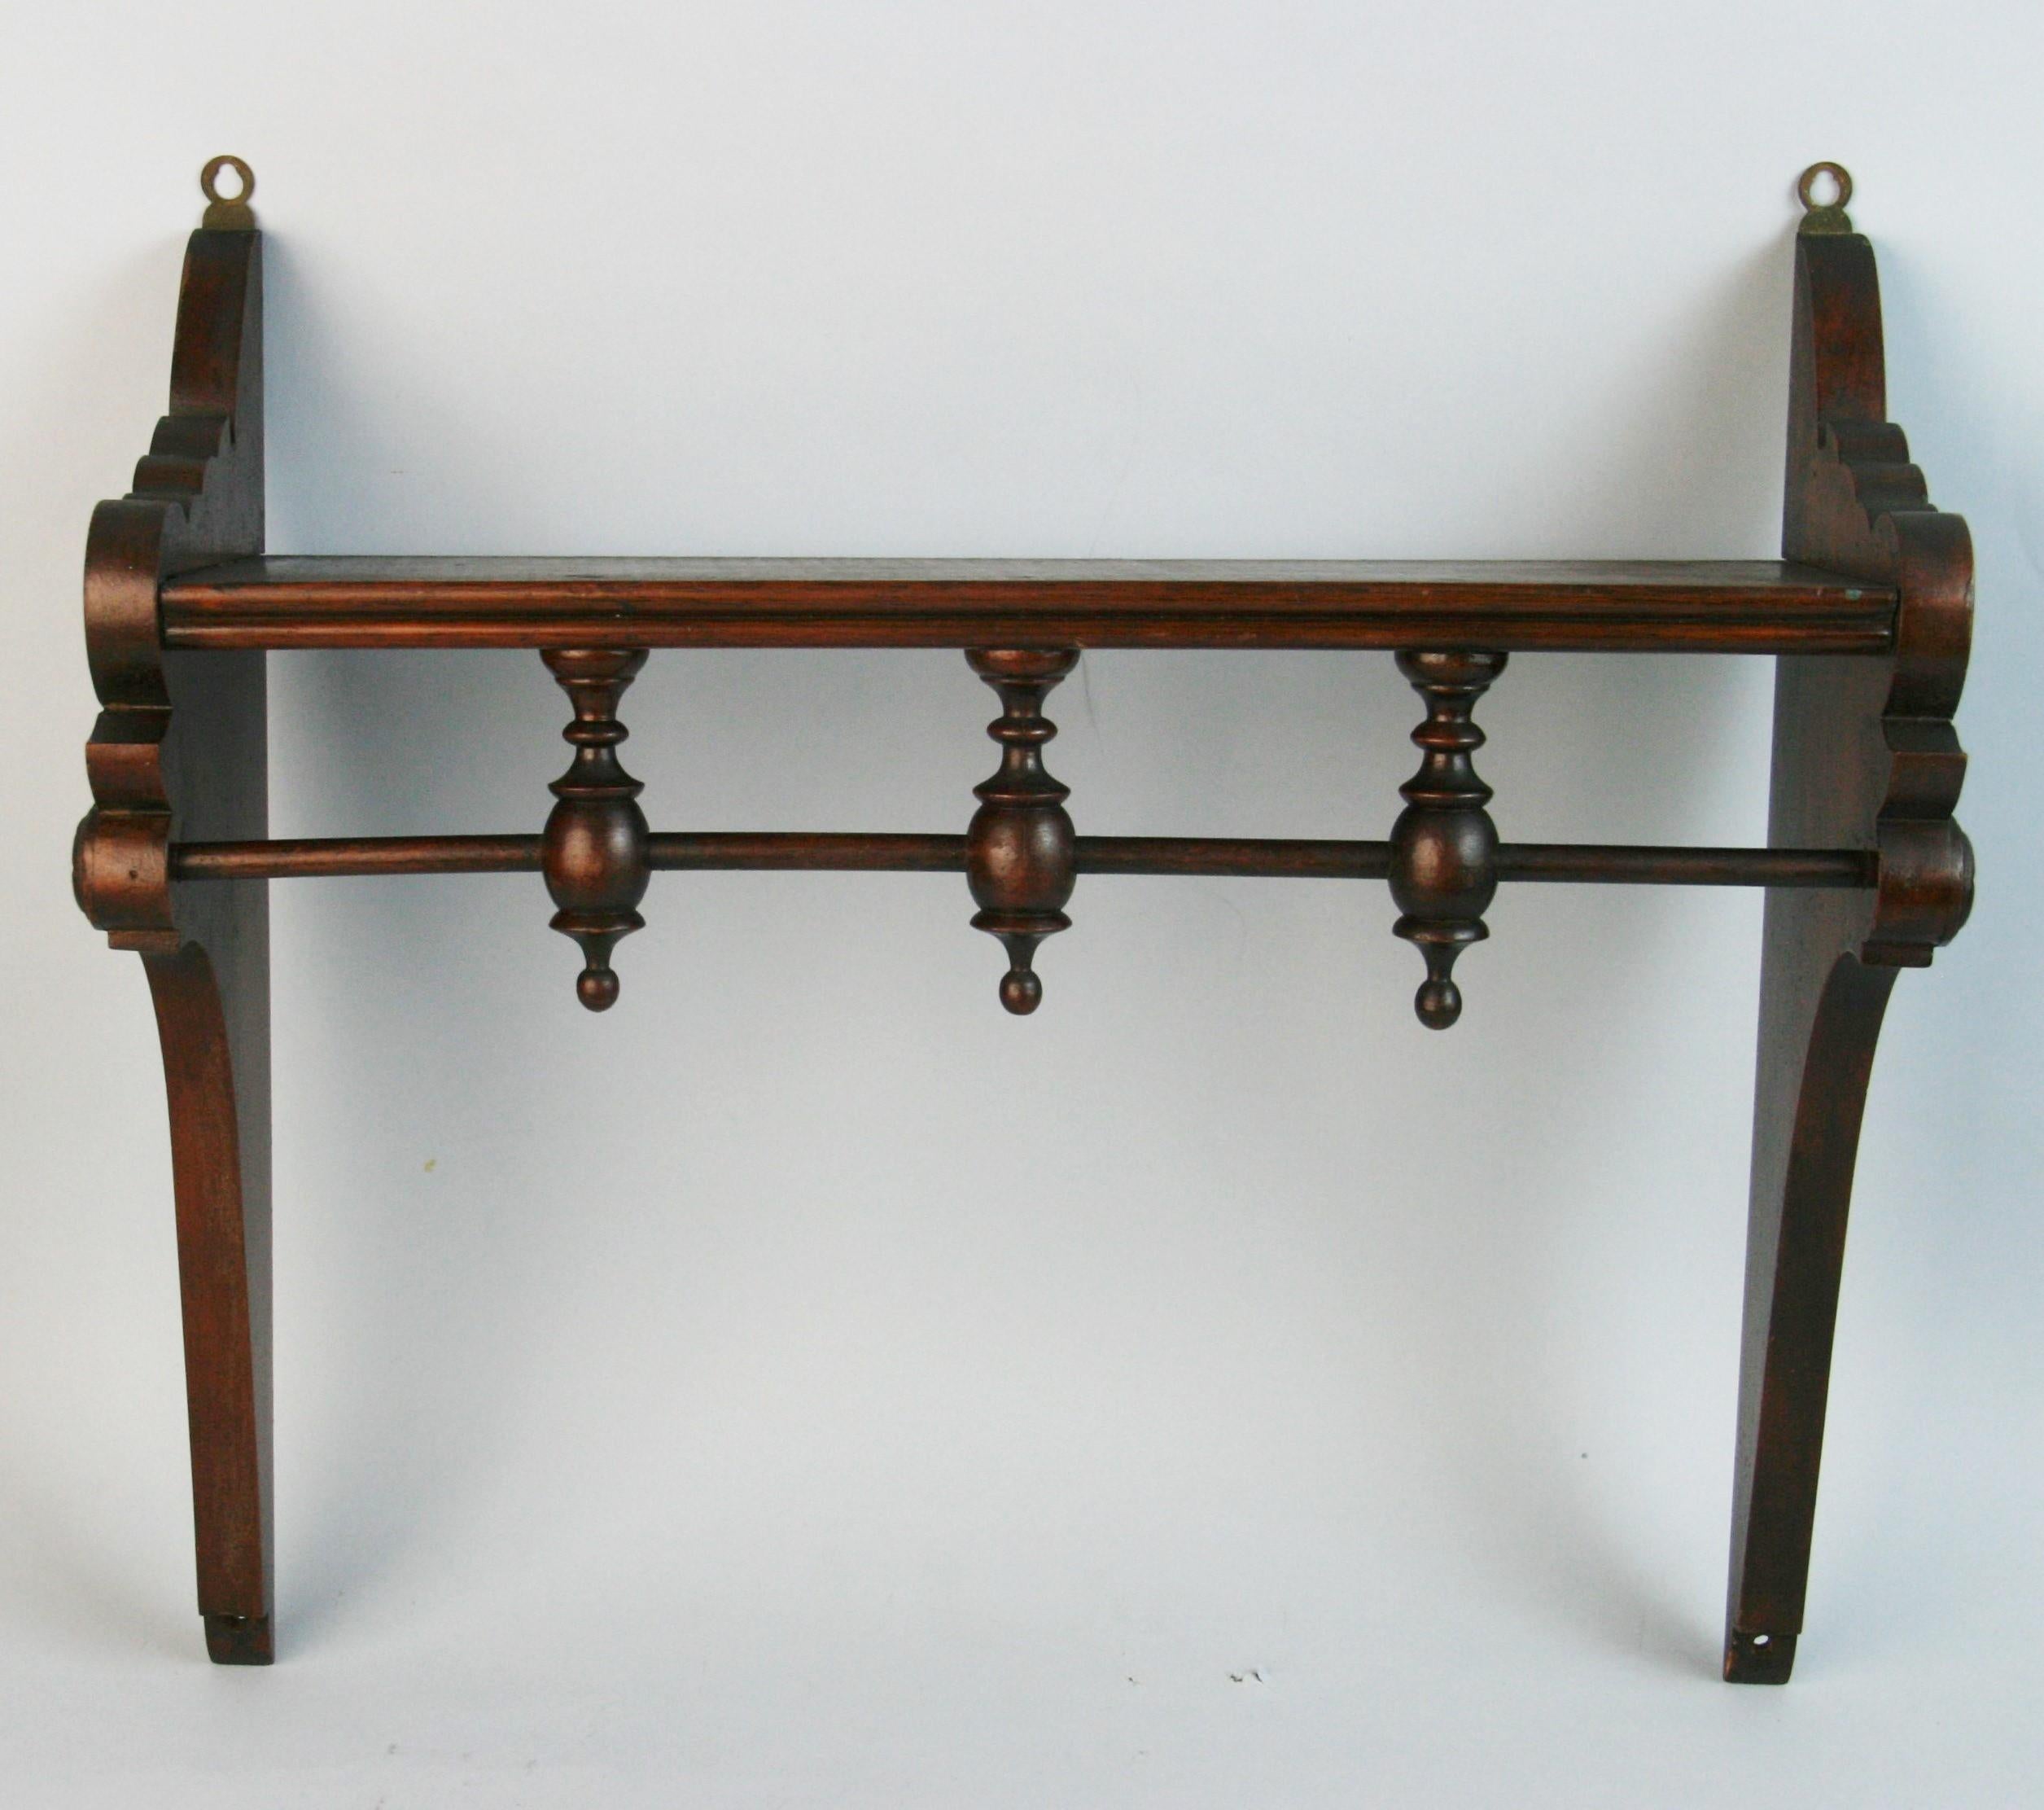 Austrian Turned Walnut Wall Shelf In Good Condition For Sale In Douglas Manor, NY